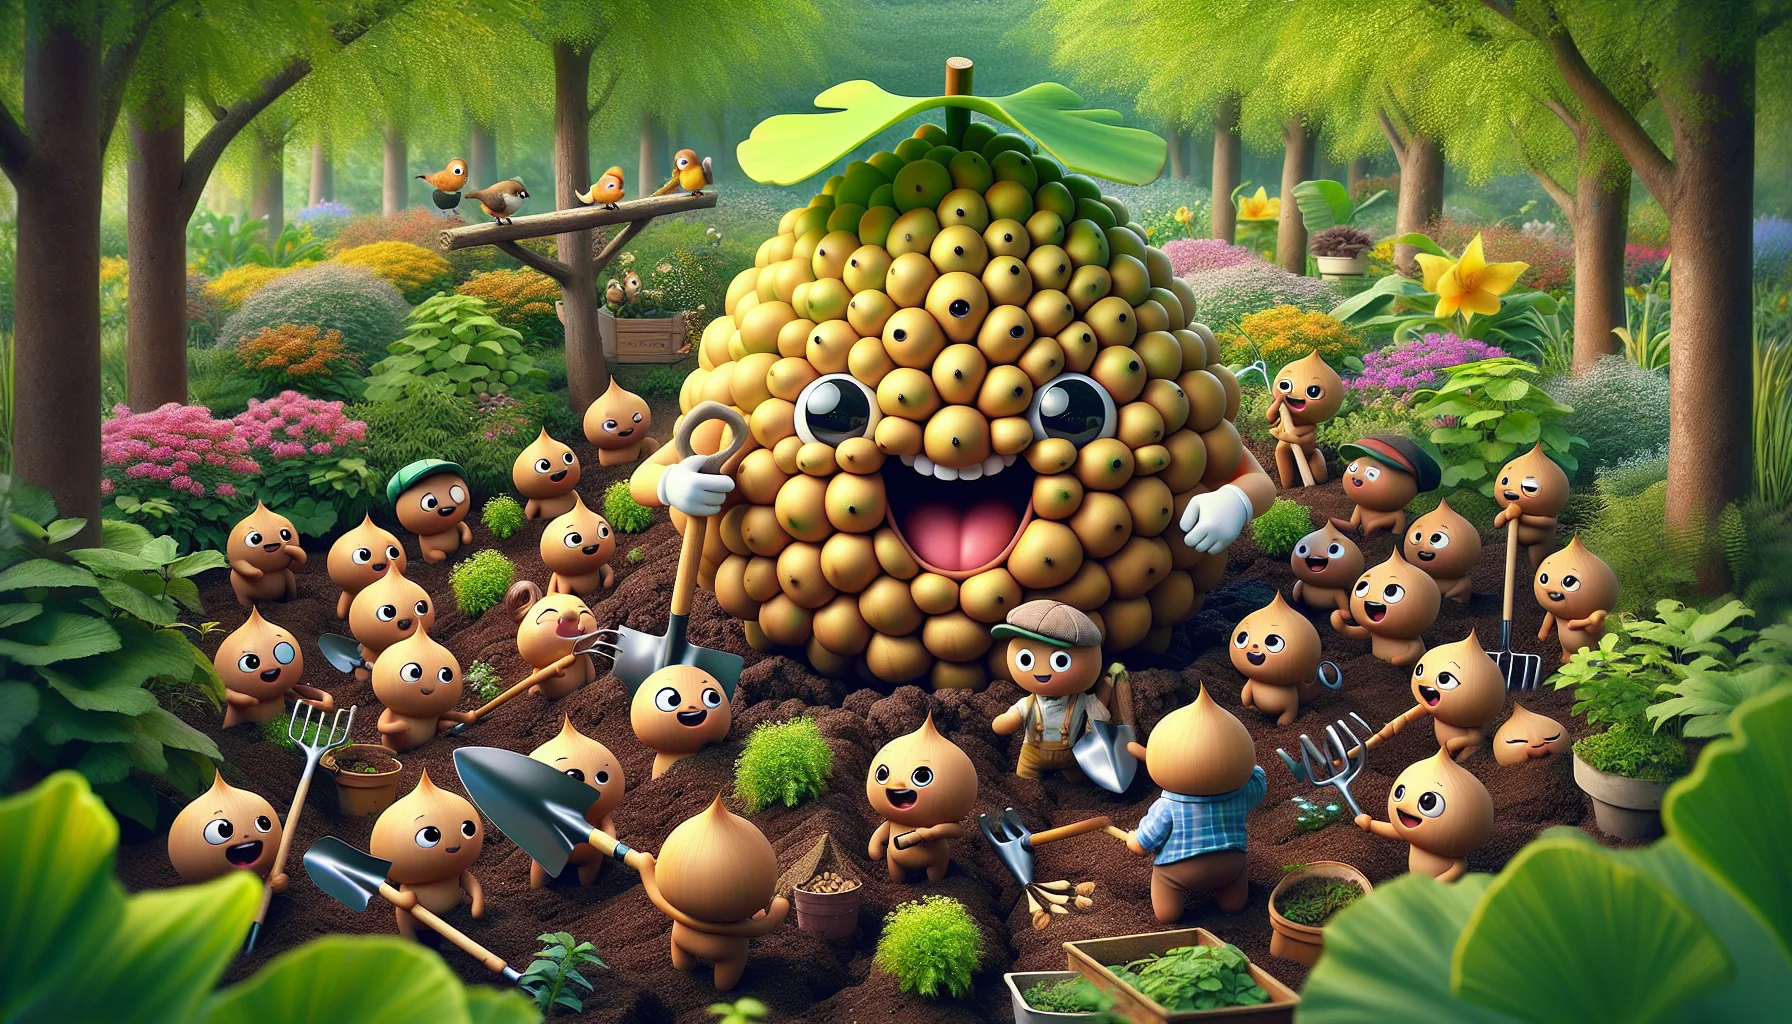 An amusing and realistic scene revolving around a ginkgo berry. In this lush garden, the ginkgo berry has countless cute, cartoon eyes and a large grinning mouth. To its side, a group of gardening tools with animated expressions dutifully follow instructions from the humorous ginkgo berry leader, turning the soil and planting seeds. They are surrounded by thriving plants of various colors and sizes. Birds and squirrels occasionally come to watch, their laughter evident in their bright eyes. This lively scene captures the joy of gardening and the allure of the ginkgo berry in a lighthearted way.